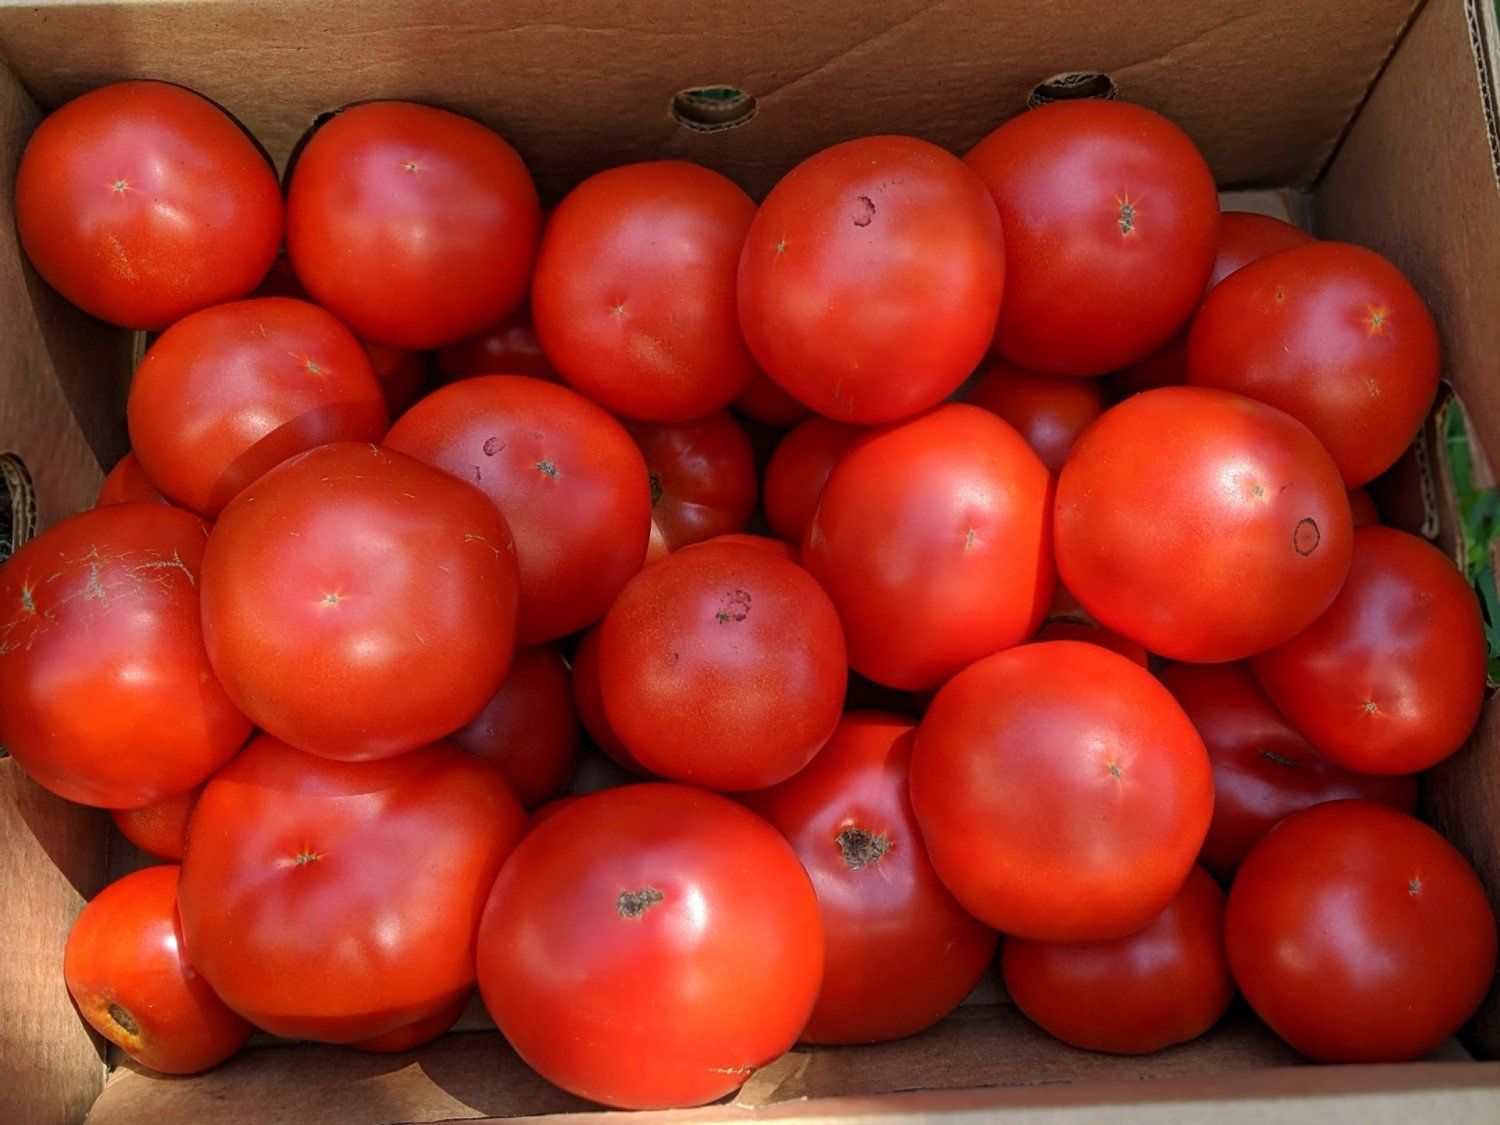 Customize your box for tomatoes.